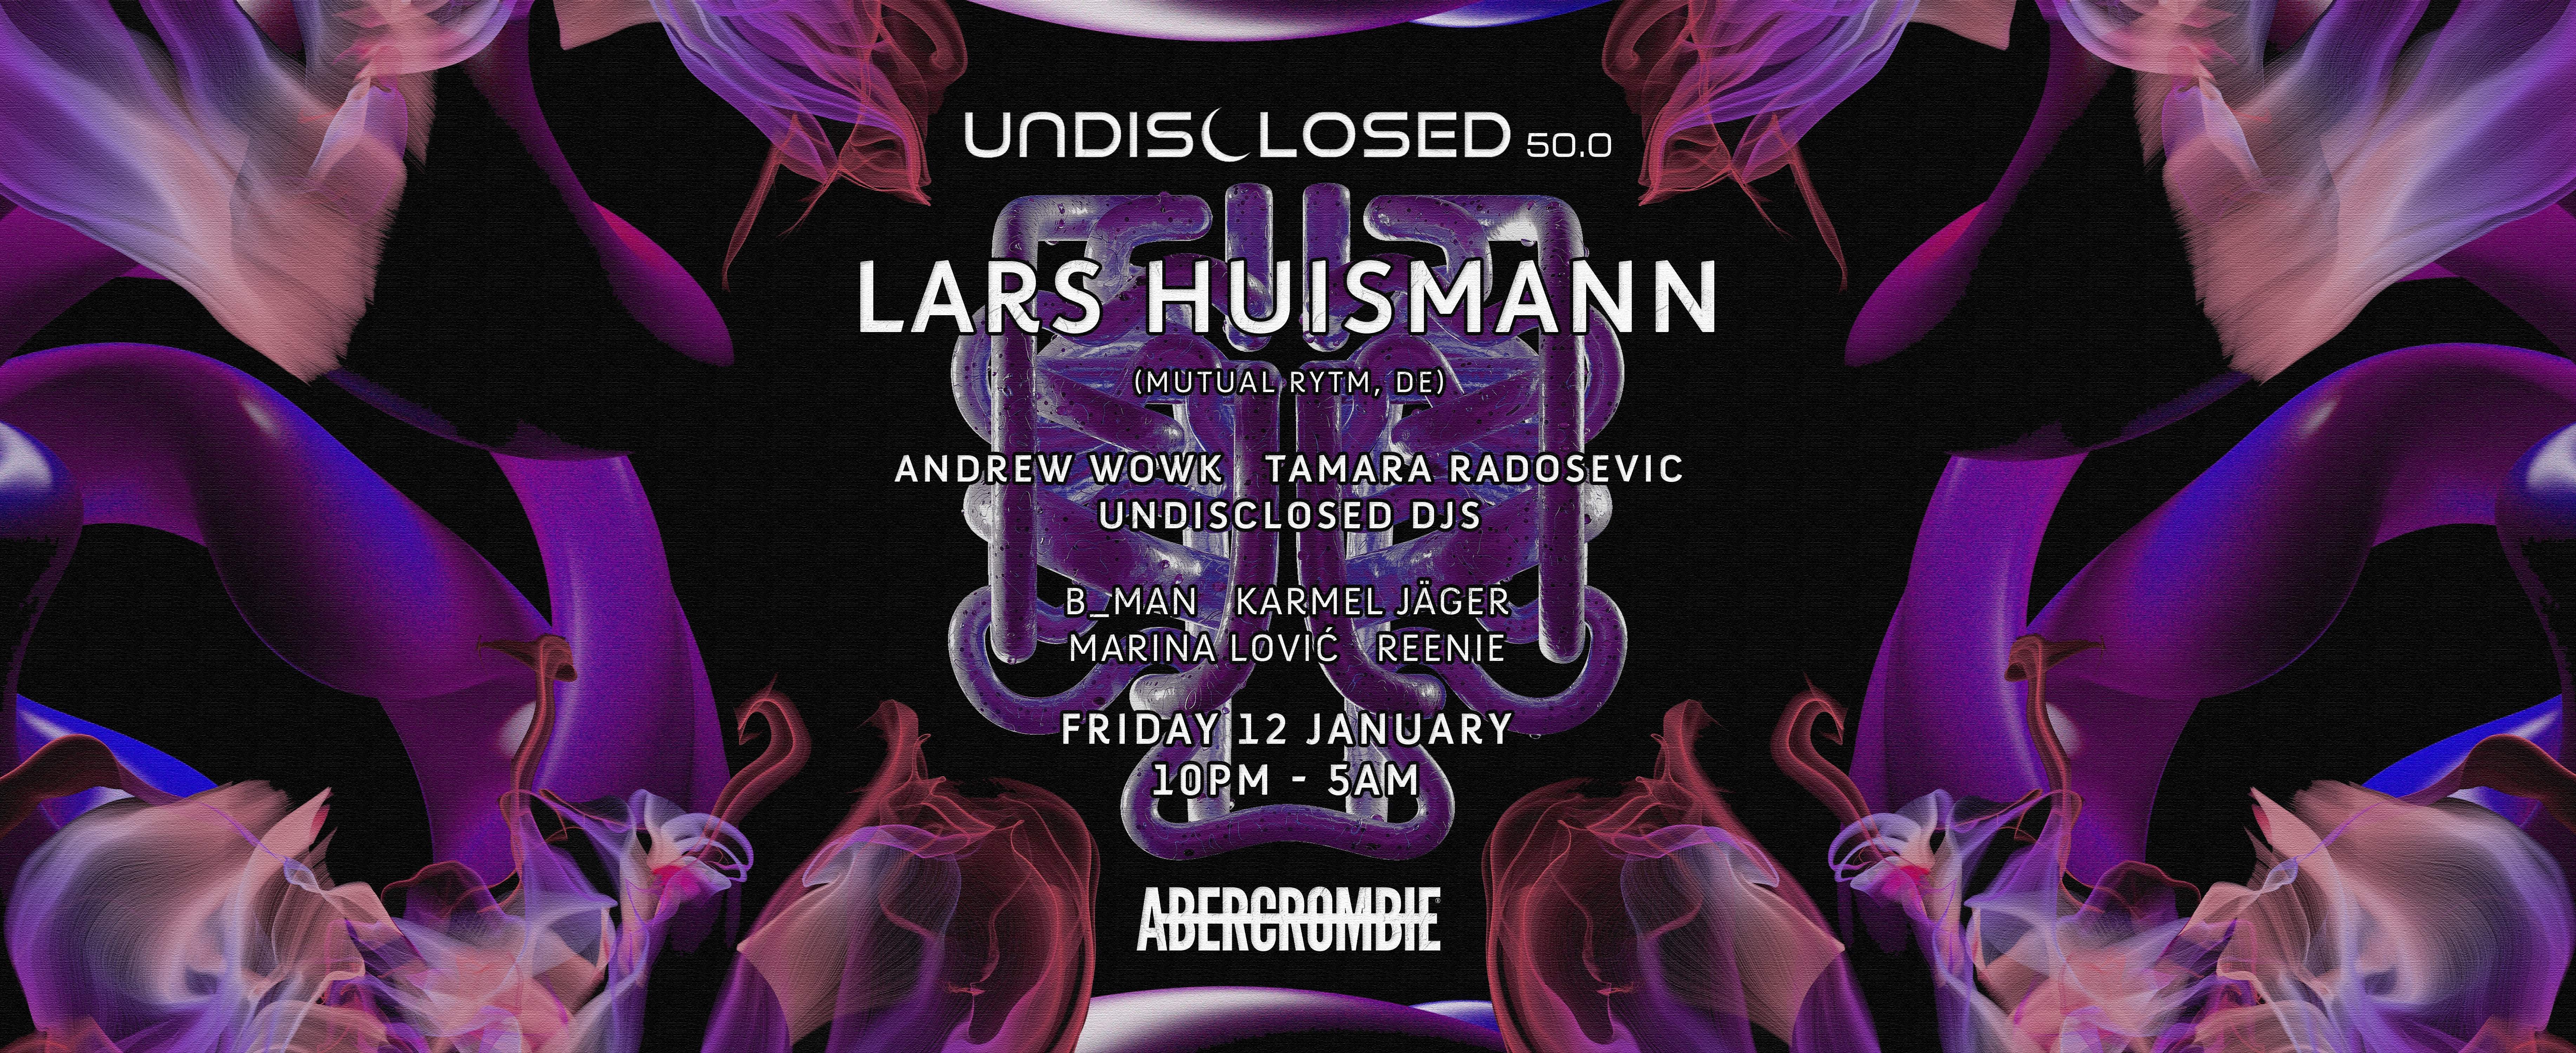 UNDISCLOSED 50.0 with Lars Huismann - Página frontal